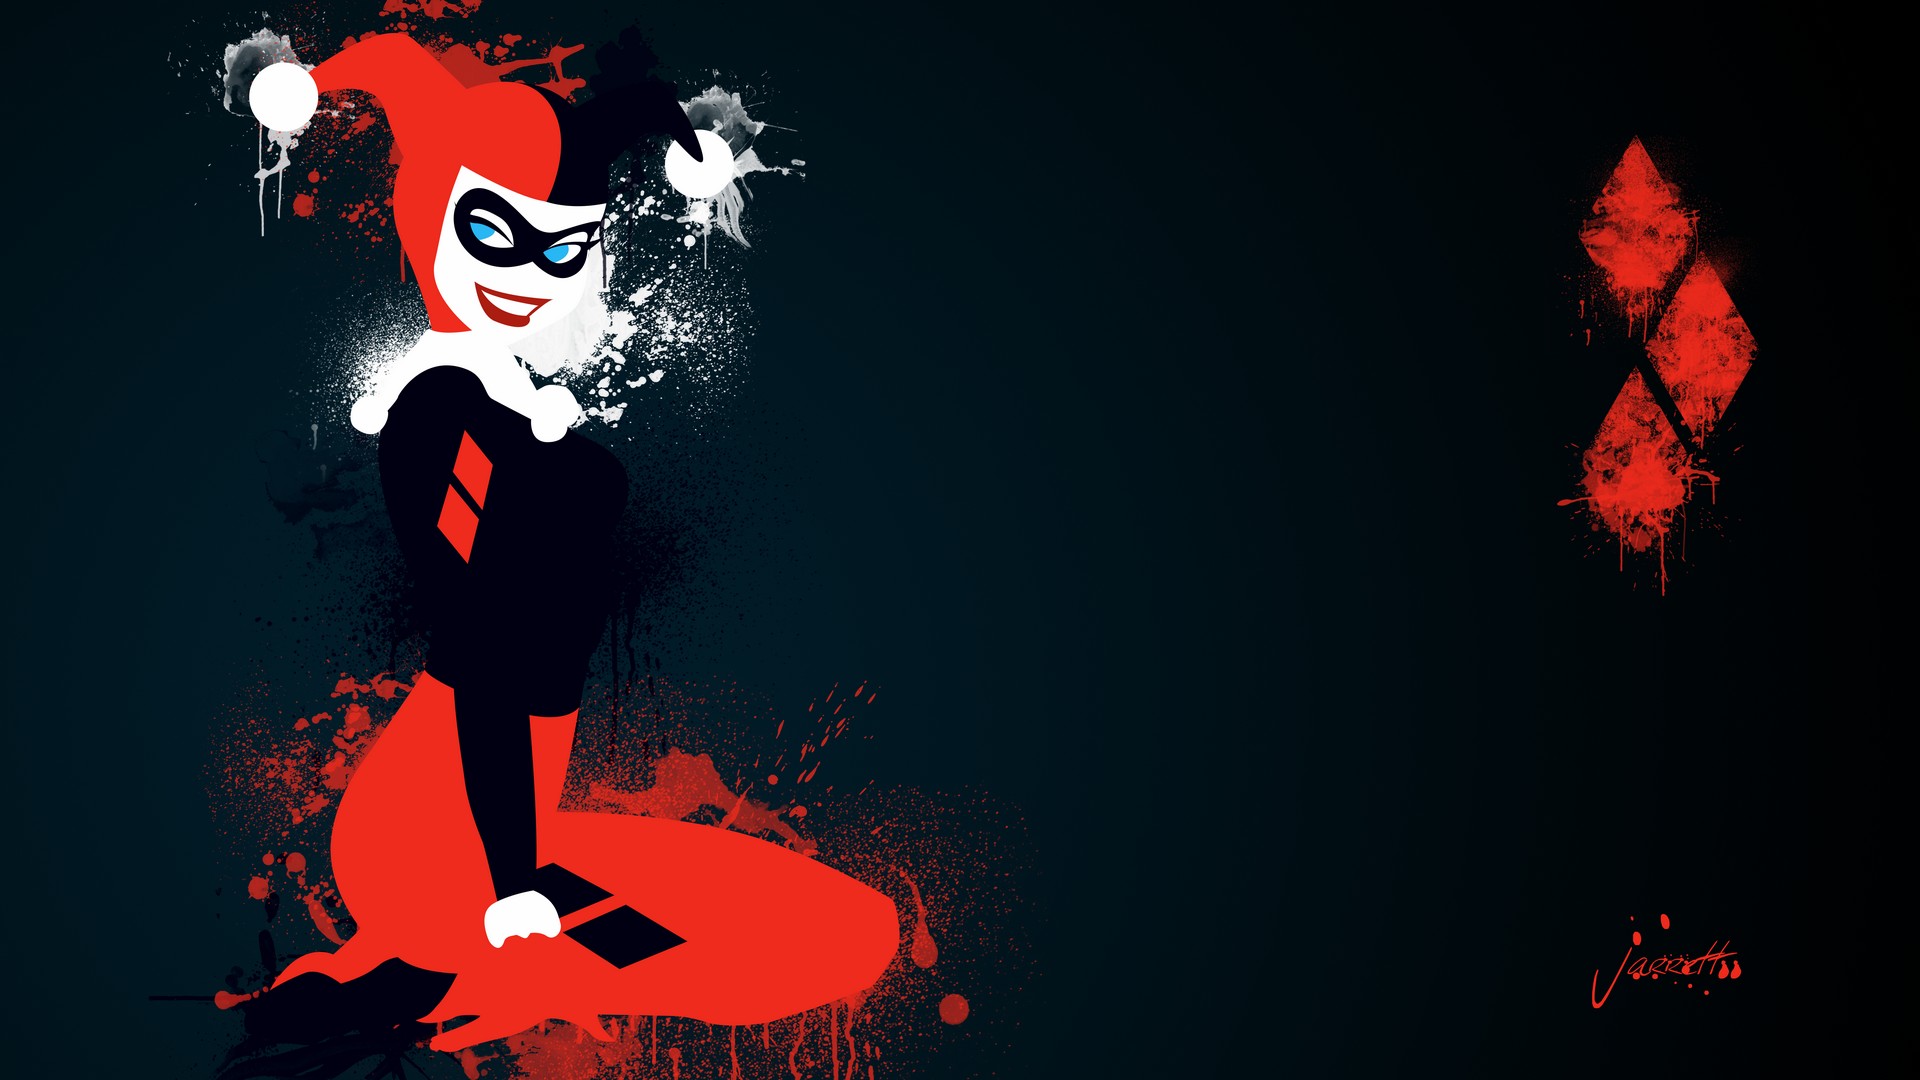 Wallpaper Harley Quinn The Movie Desktop with resolution 1920X1080 pixel. You can use this wallpaper as background for your desktop Computer Screensavers, Android or iPhone smartphones